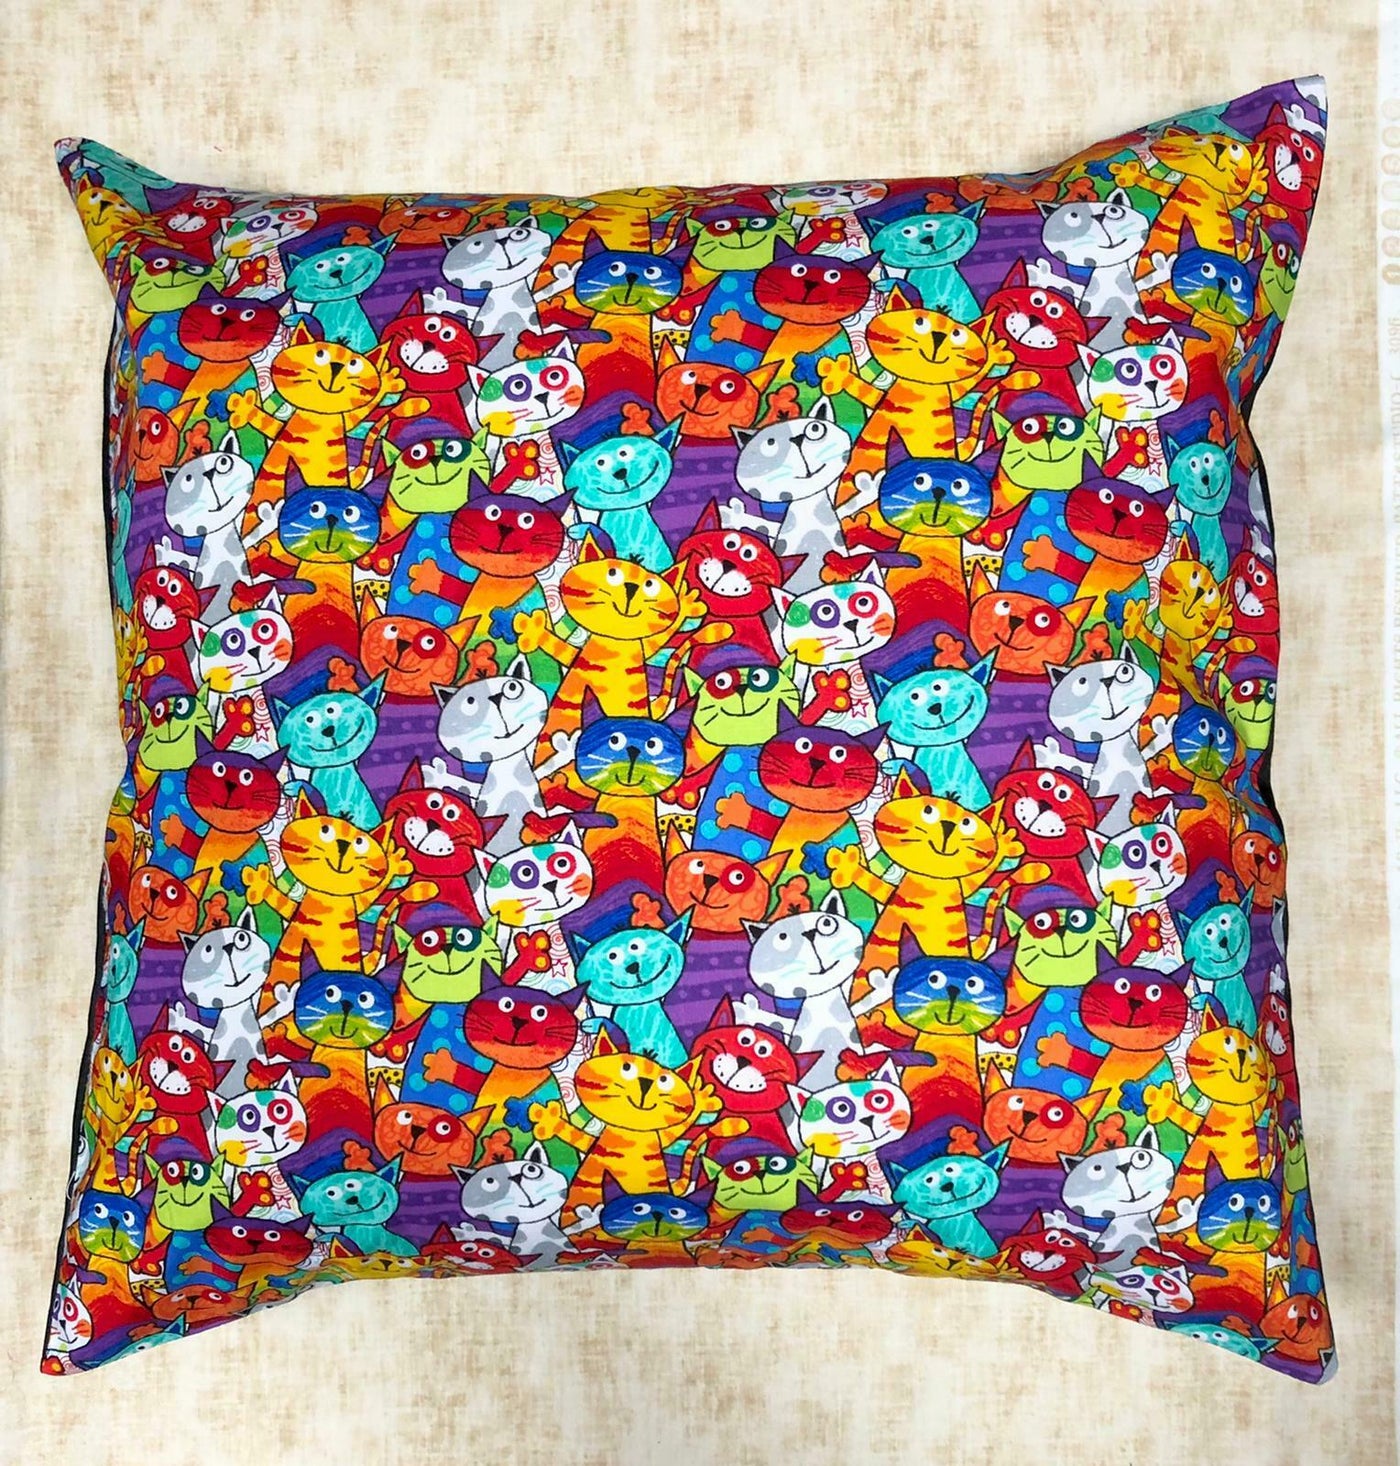 Wise Alley Cat Cushion Cover Decorative Case fits 18" x 18" Garfield Top Cat